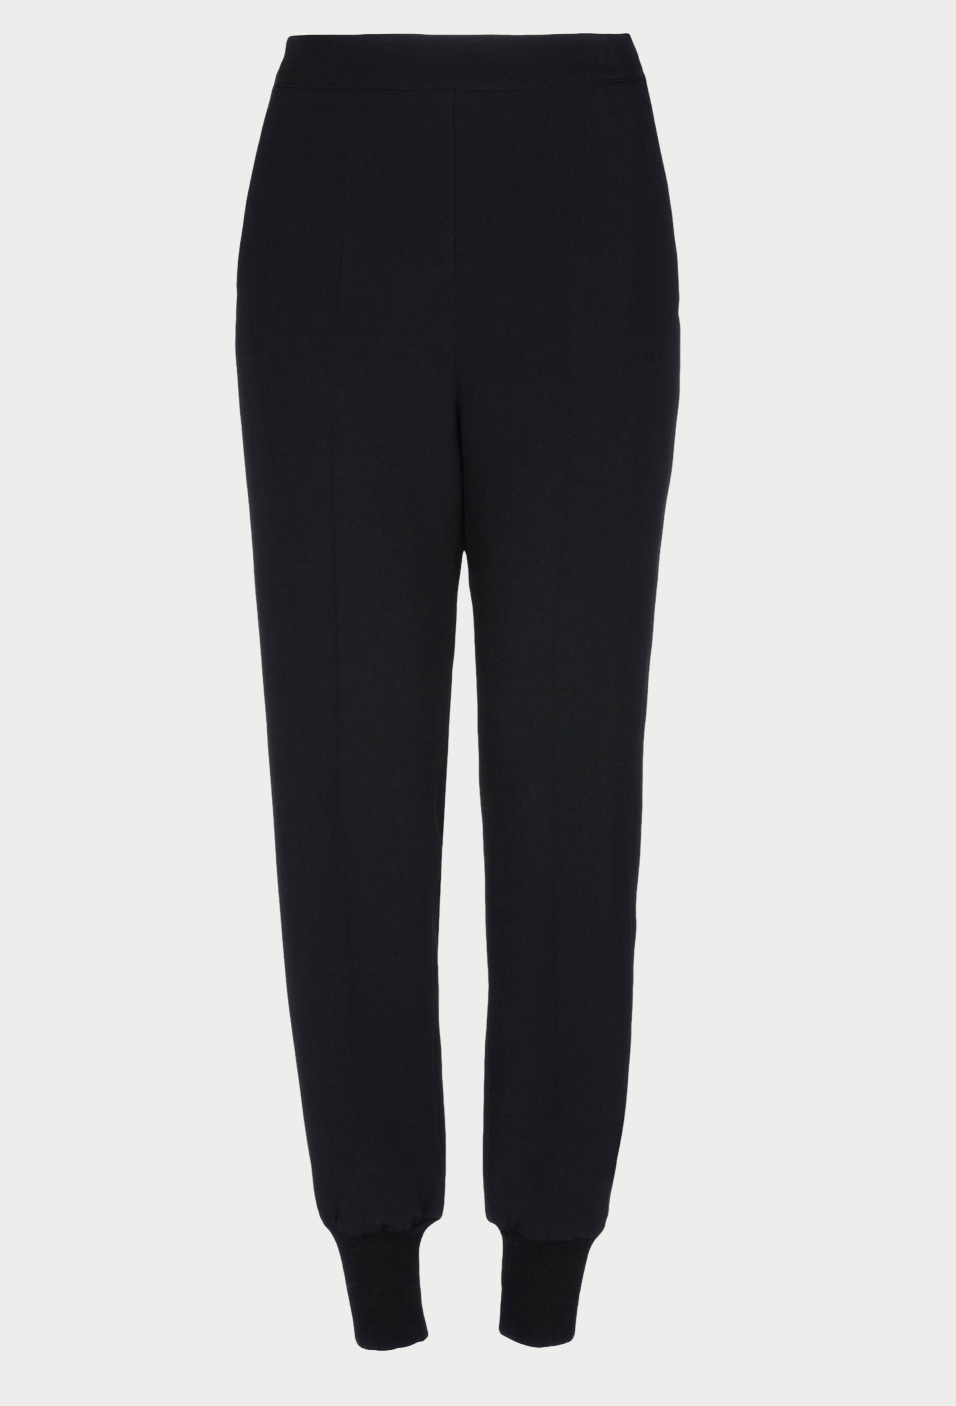 Stella McCartney - Julia Trouser in Black - New with Tags